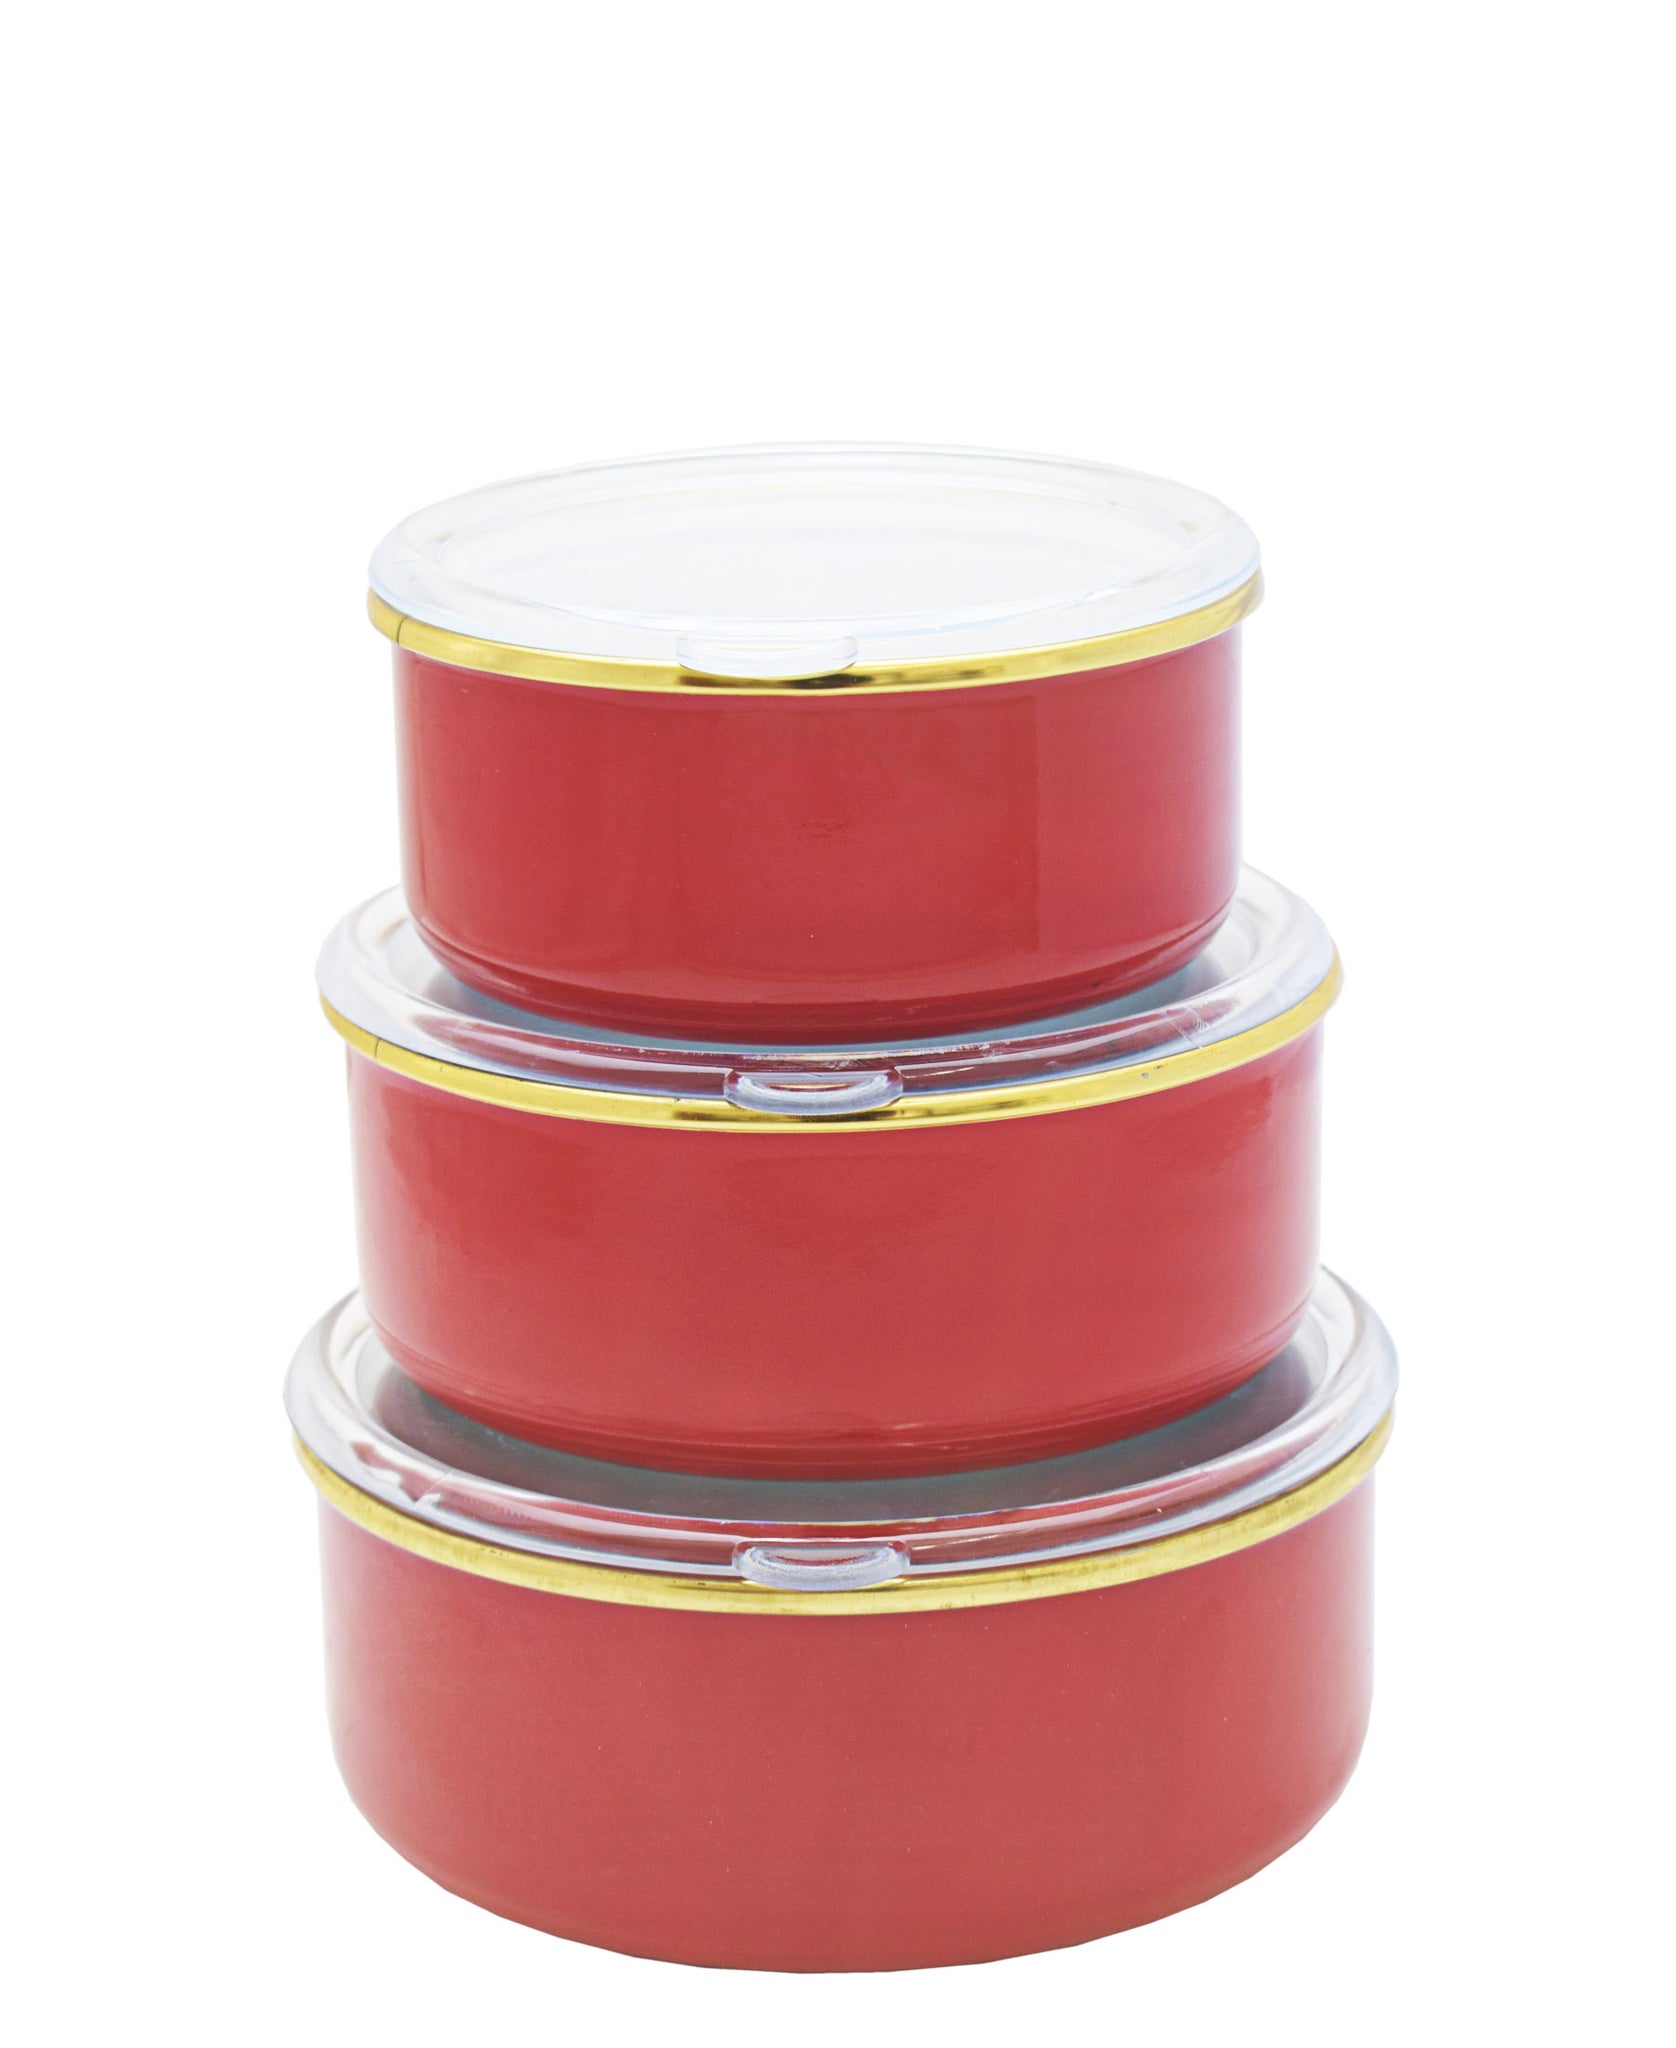 Oms 3-Piece Enamel Storage Container - Red